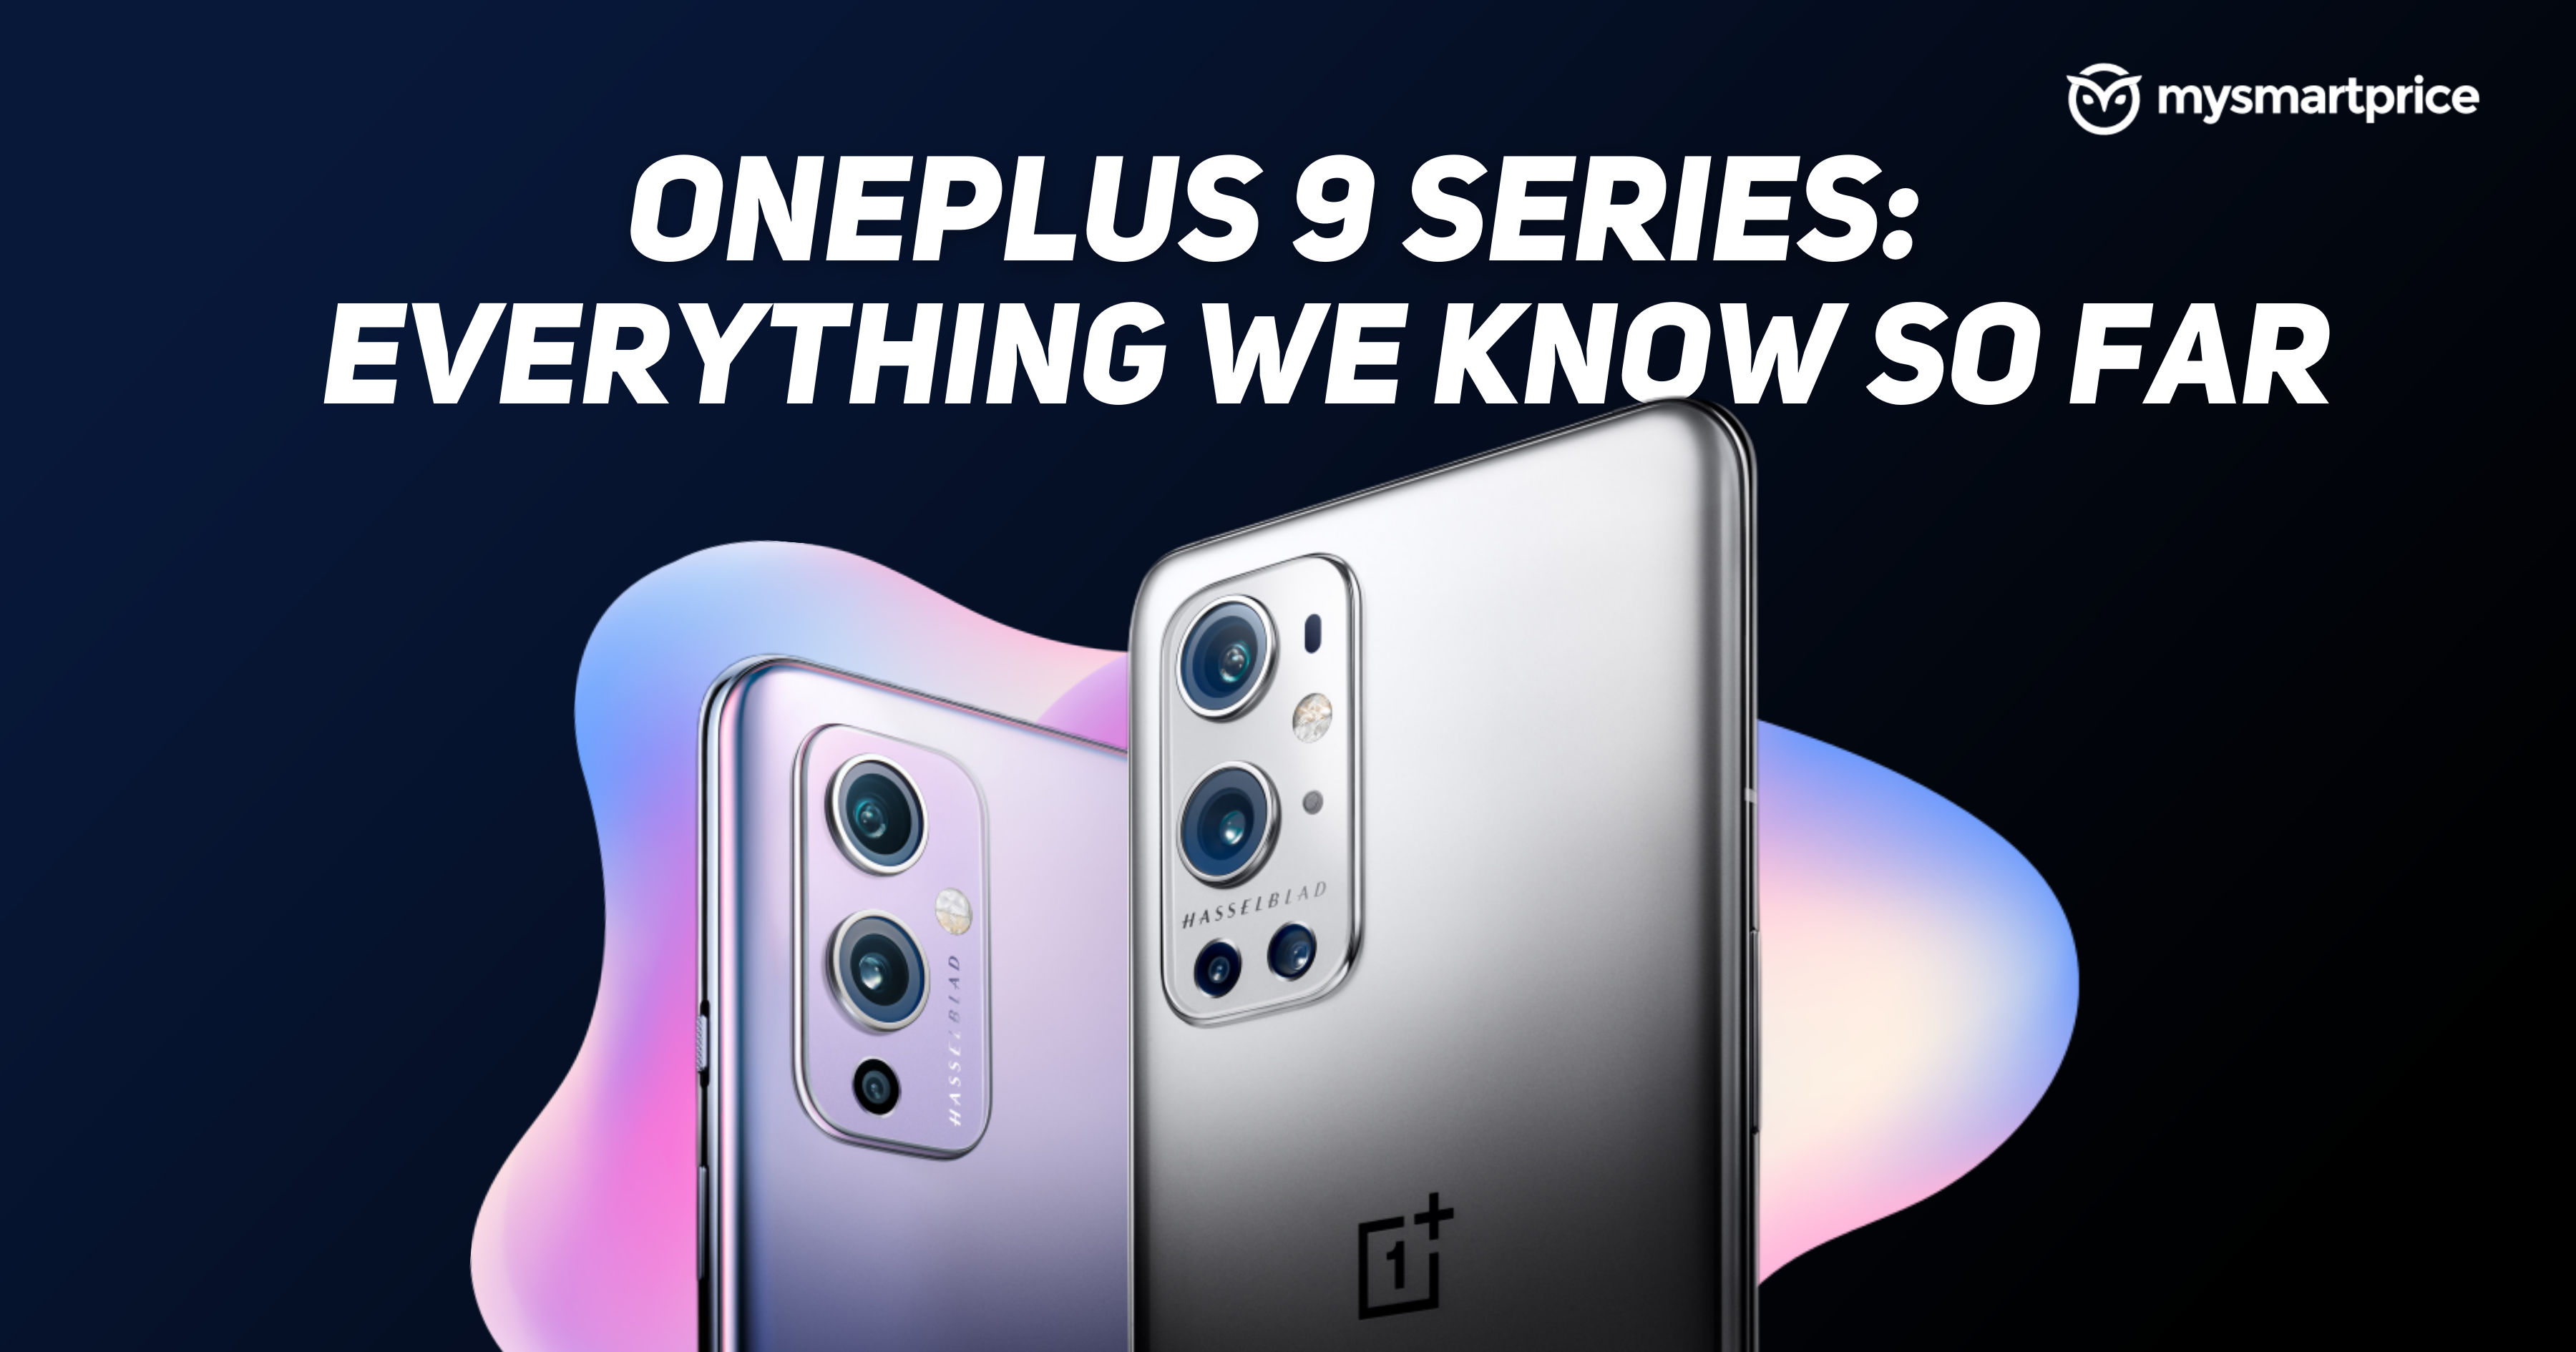 Oneplus 9 Oneplus 9 Pro Oneplus 9r Price Specifications Features We Know Ahead Of India Launch Mysmartprice